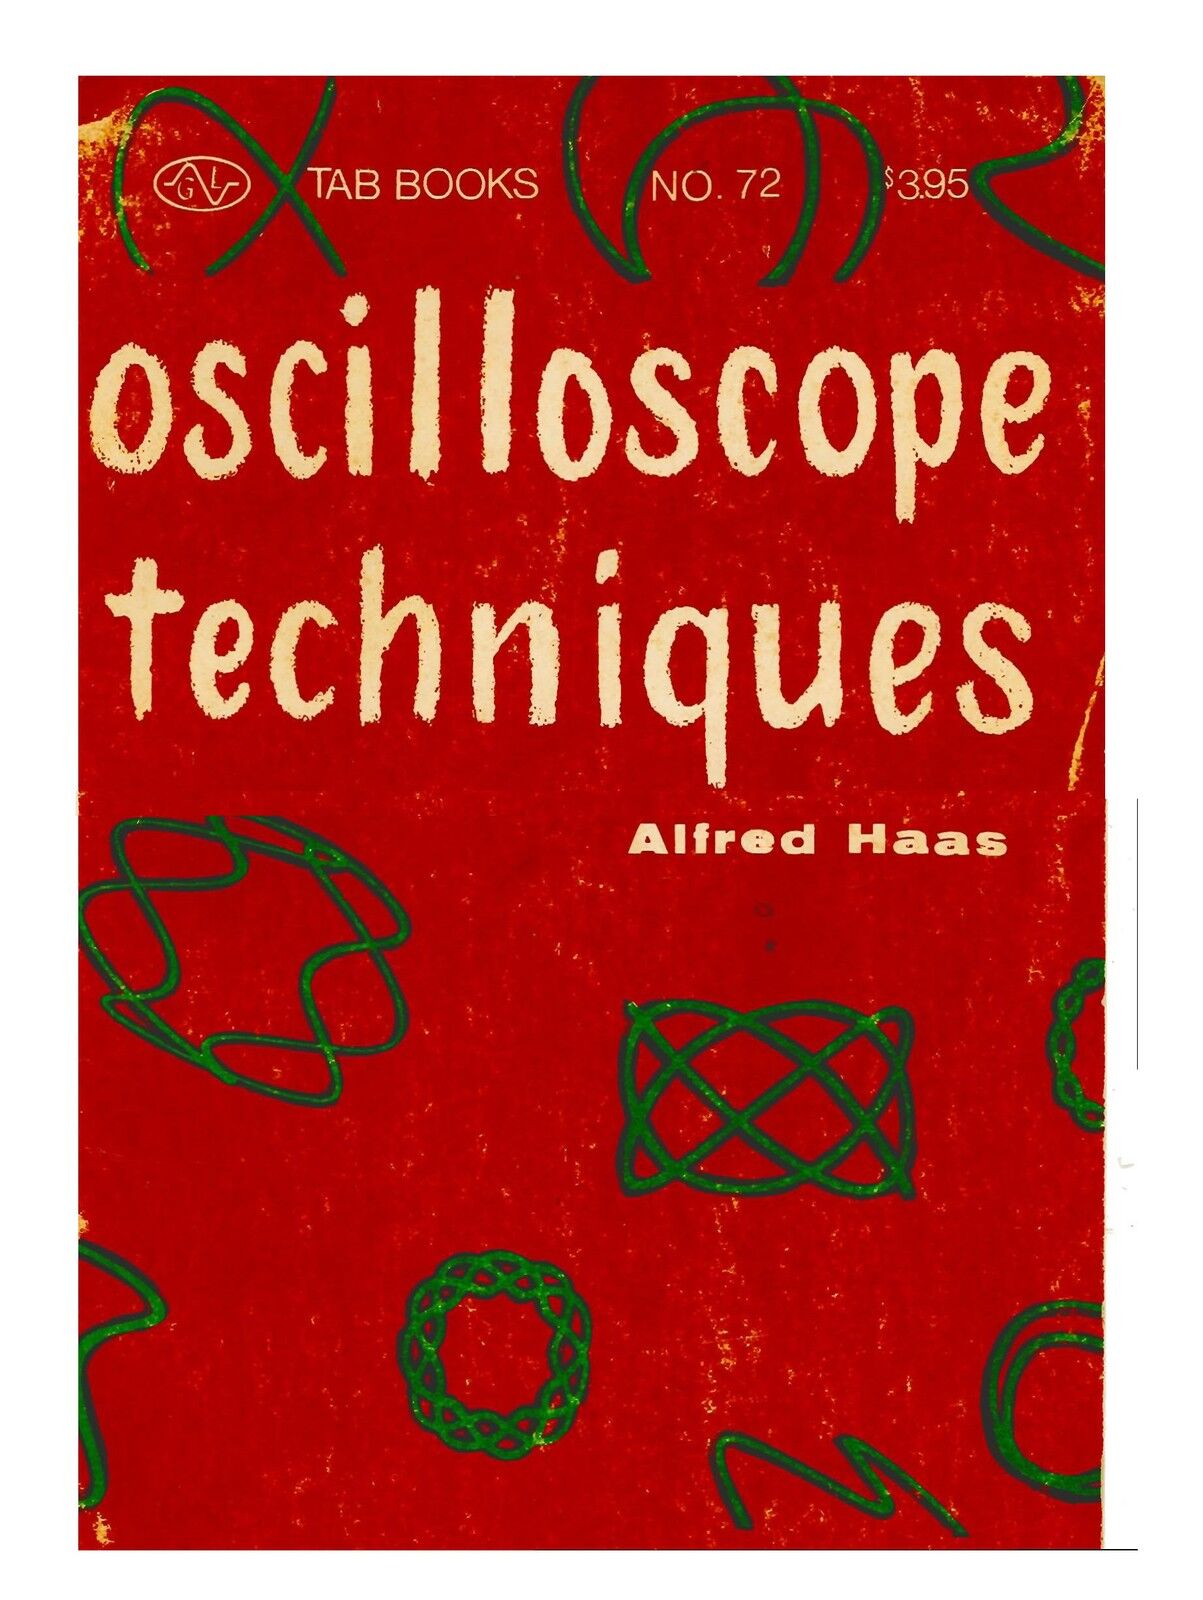 Great Book - How to use your Oscilloscope & Techniques on CD 